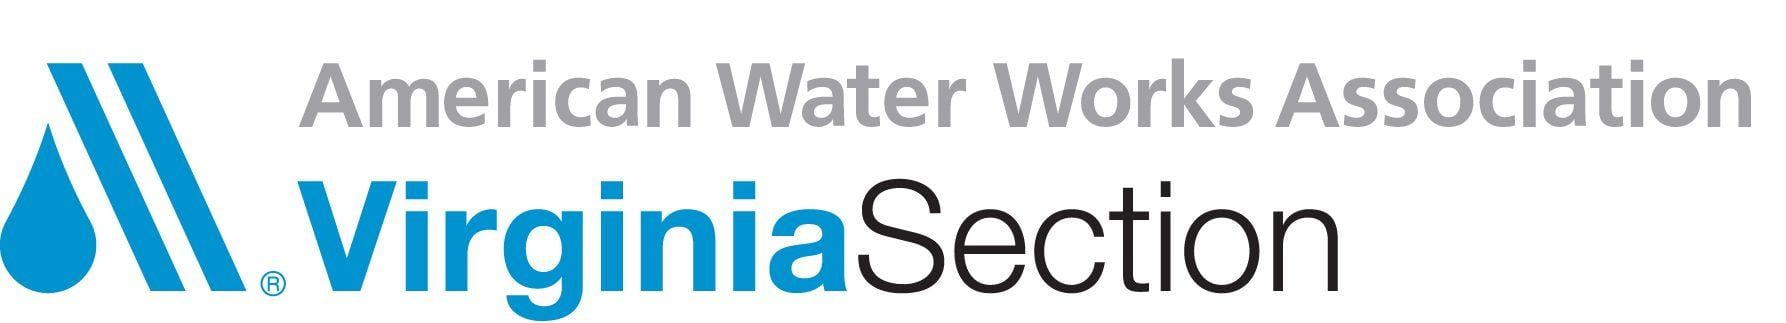 AWWA Logo - Event Planning - American Water Works Association